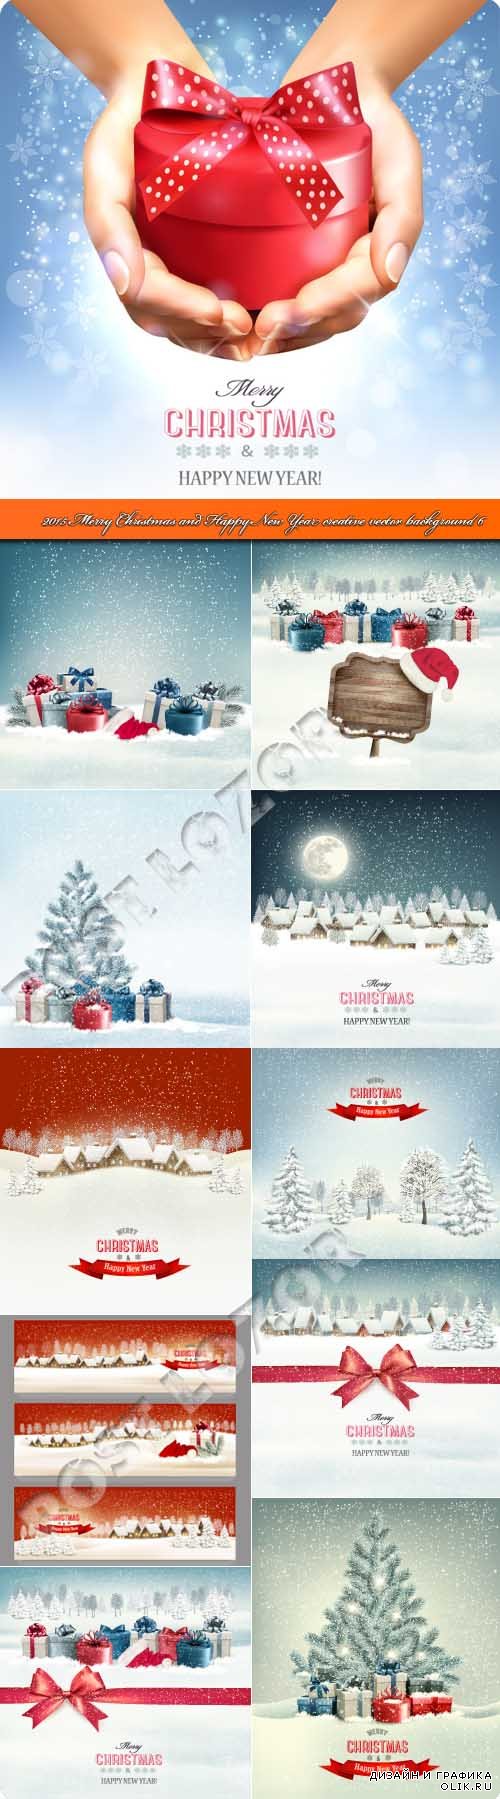 2015 Merry Christmas and Happy New Year creative vector background 6